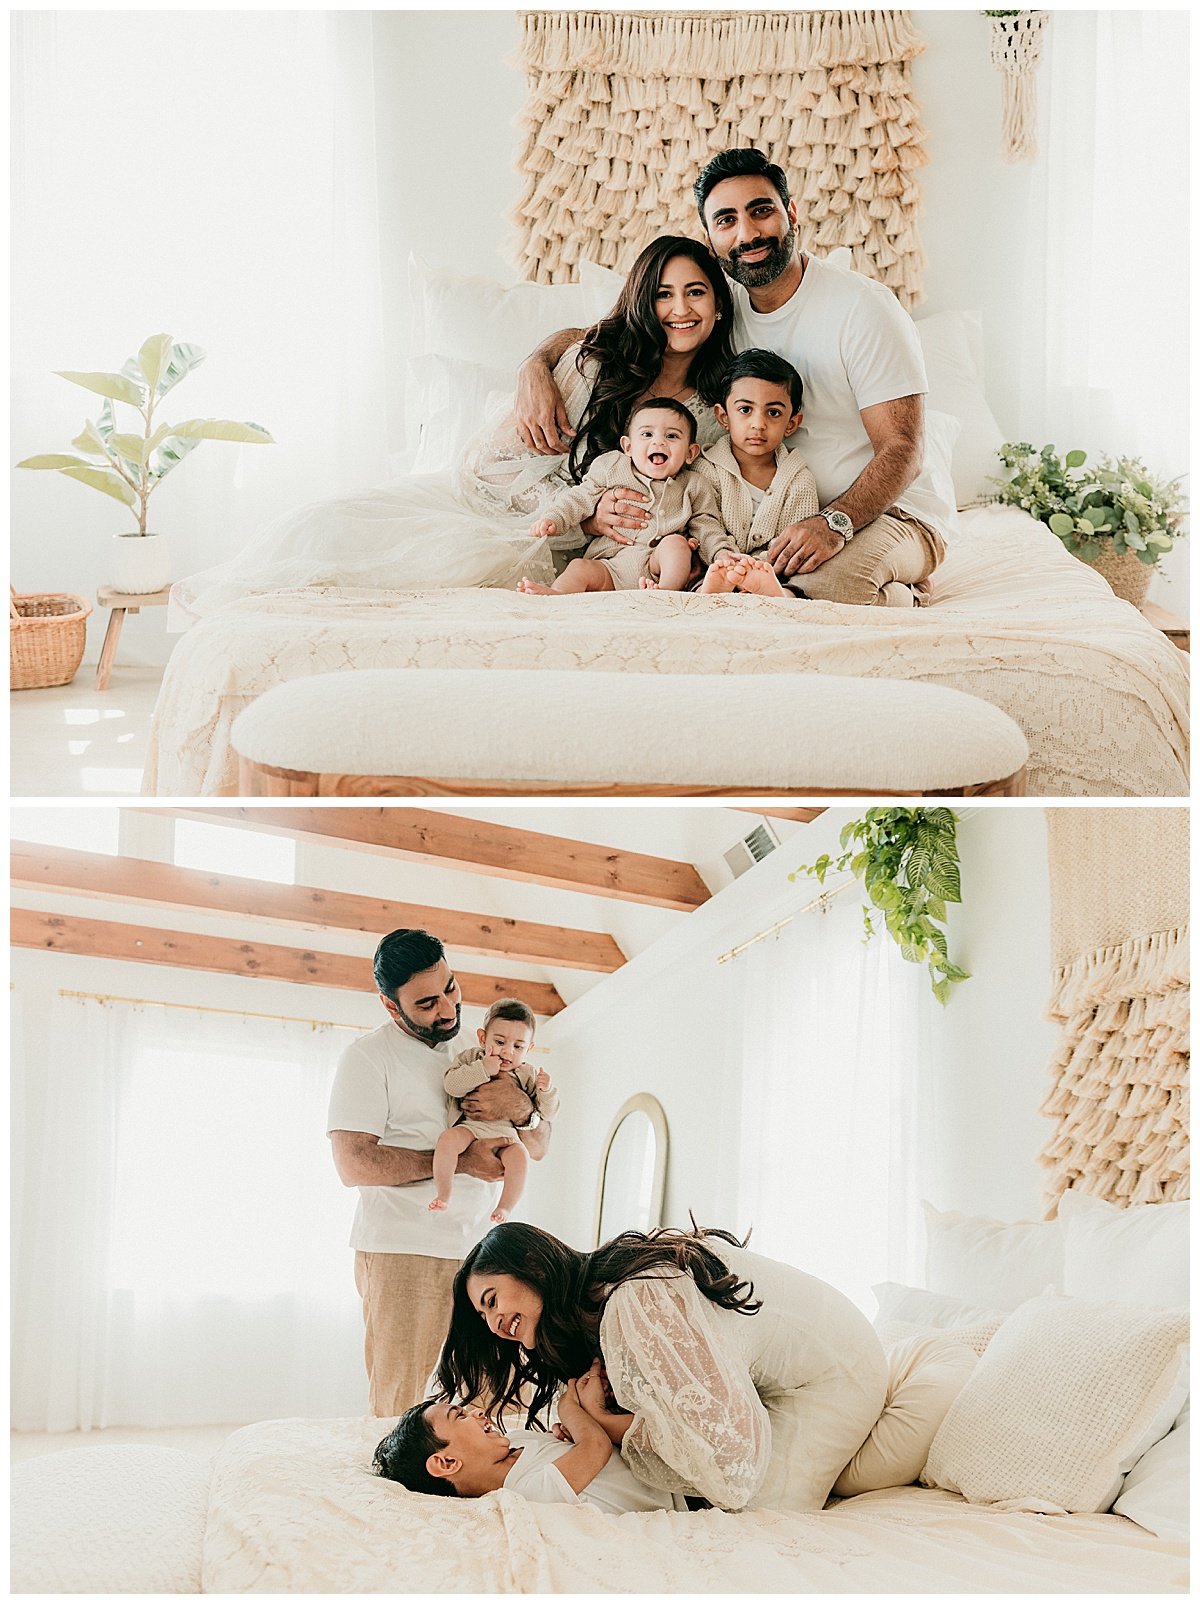 Family cuddle close together for Family Photos